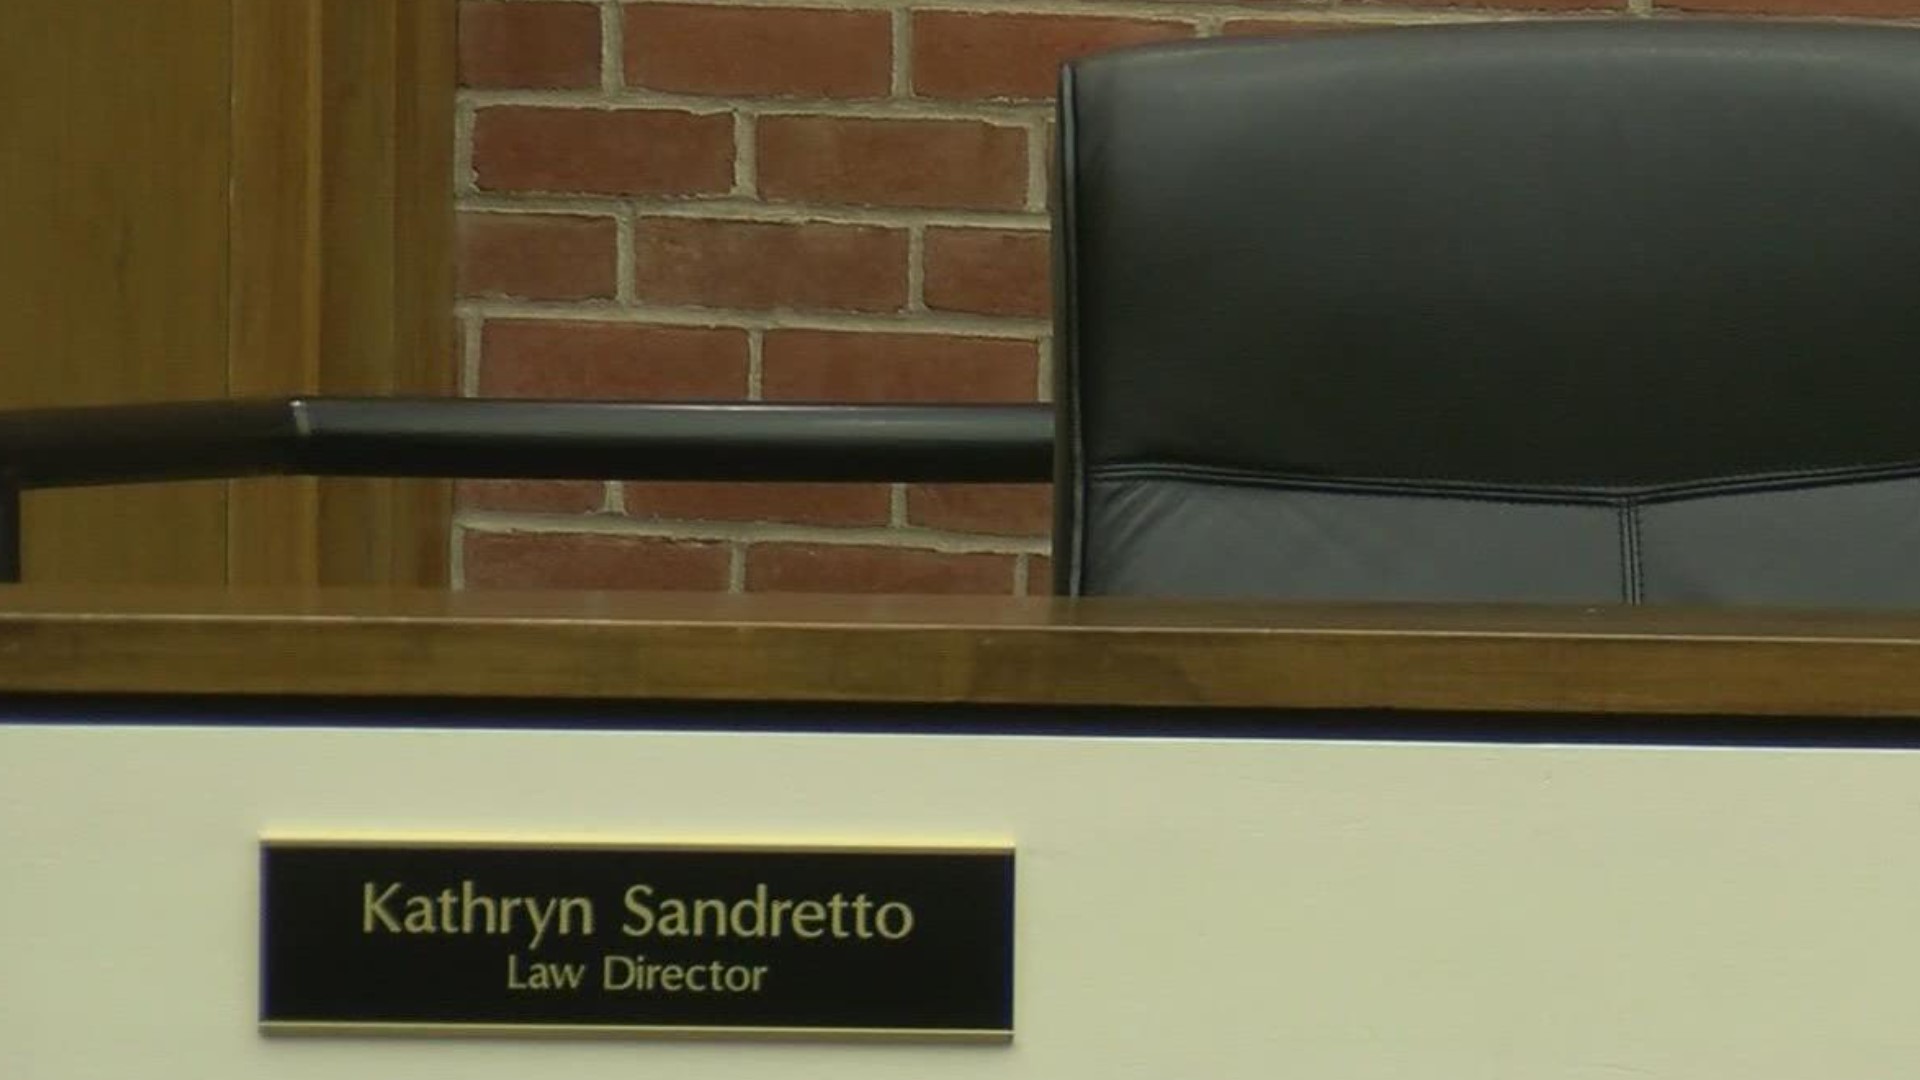 Law director Kathryn Sandretto submitted her resignation Thursday, a city of Perrysburg representative confirmed.